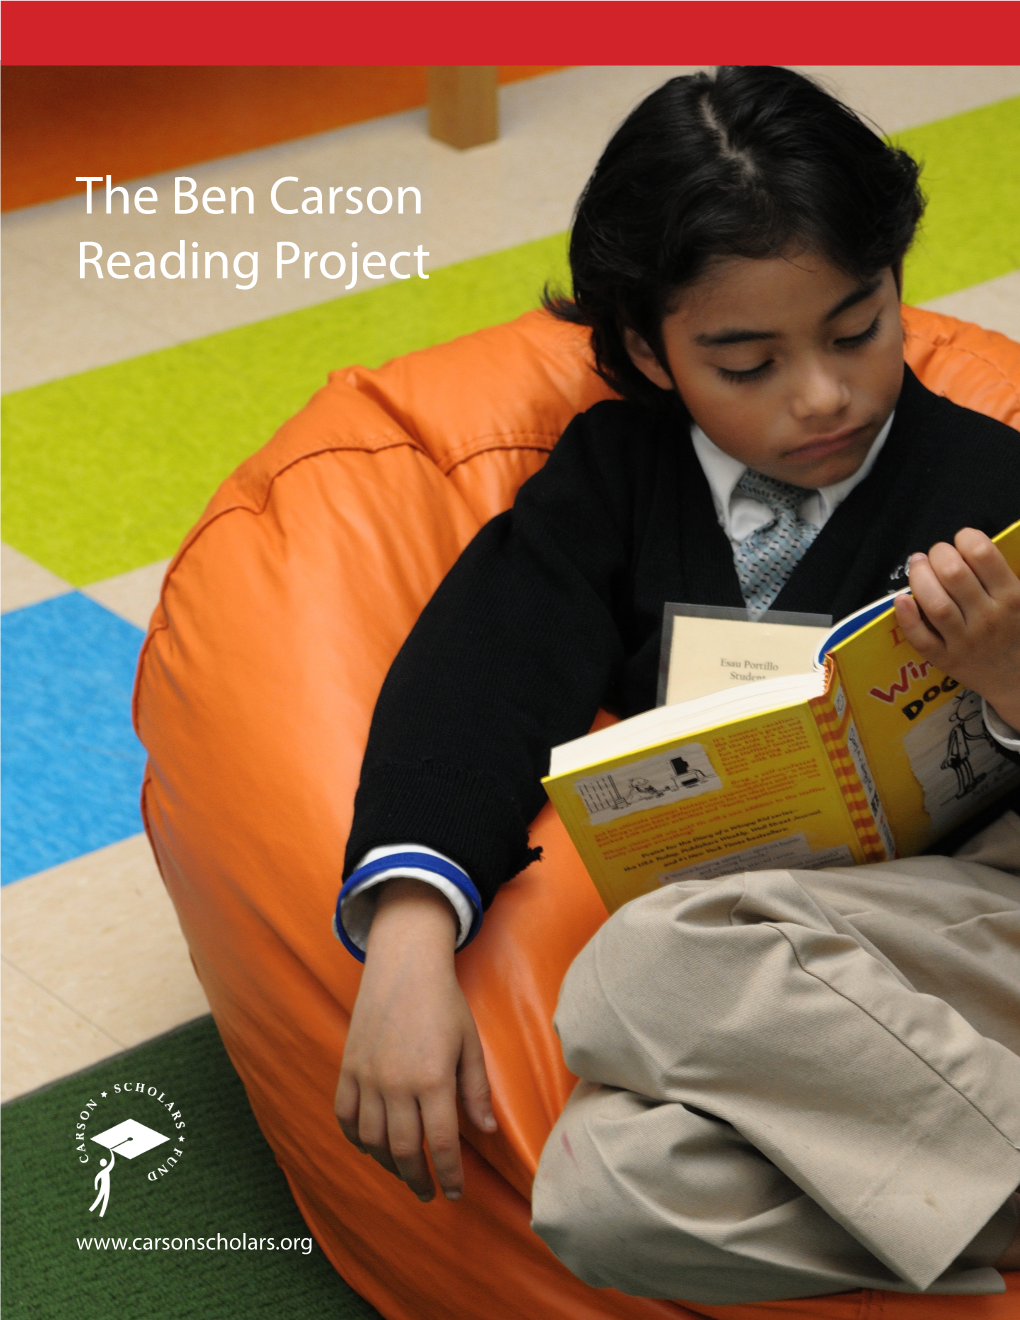 The Ben Carson Reading Project Brochure